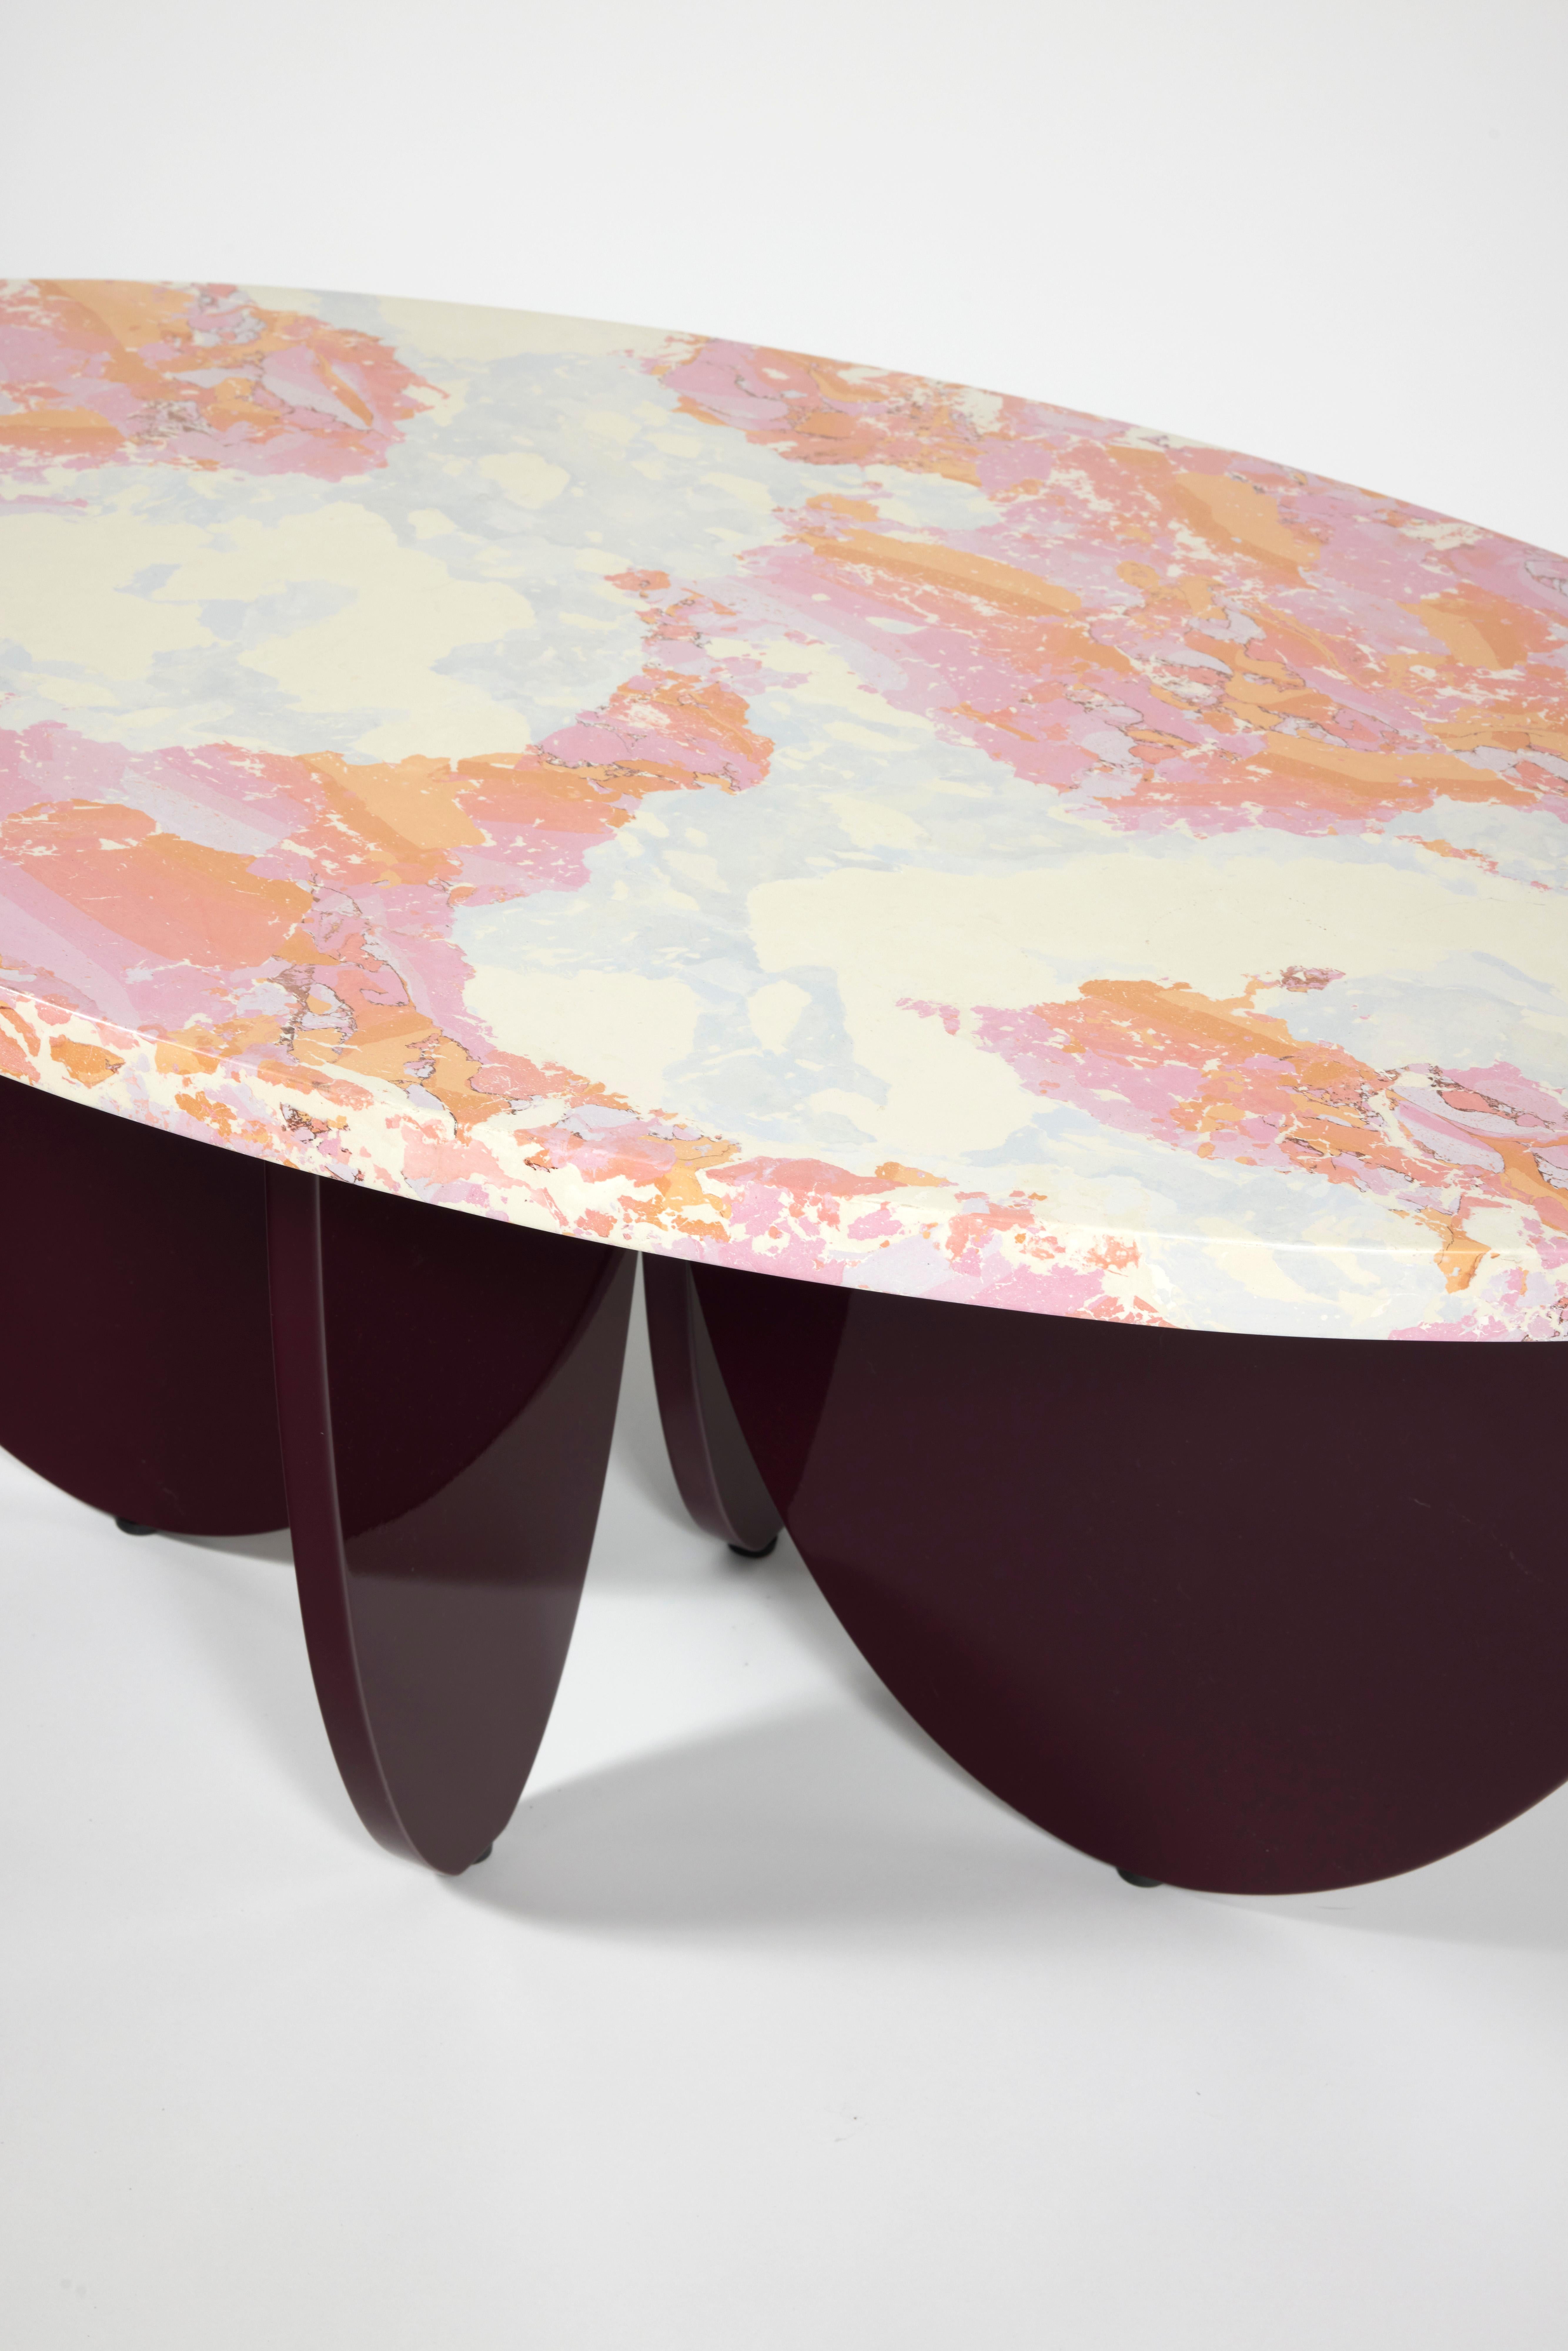 Minimalist Puntarella Stucco Lacquered Side Table Designed By Chloé Nègre For Sale